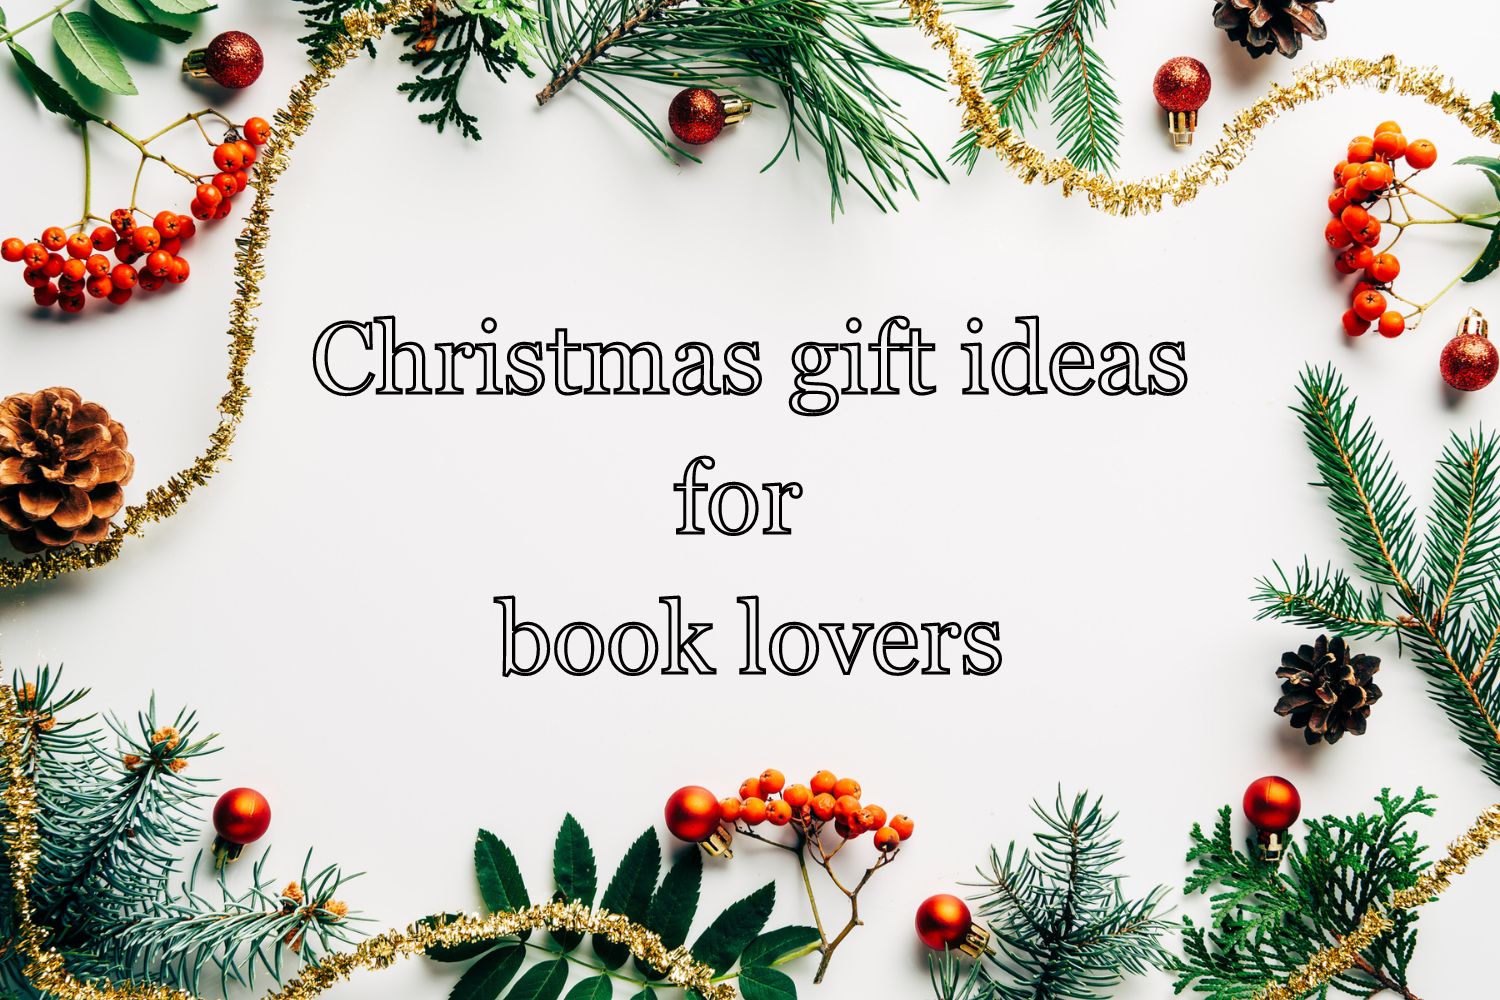 Christmas gift ideas for book lovers